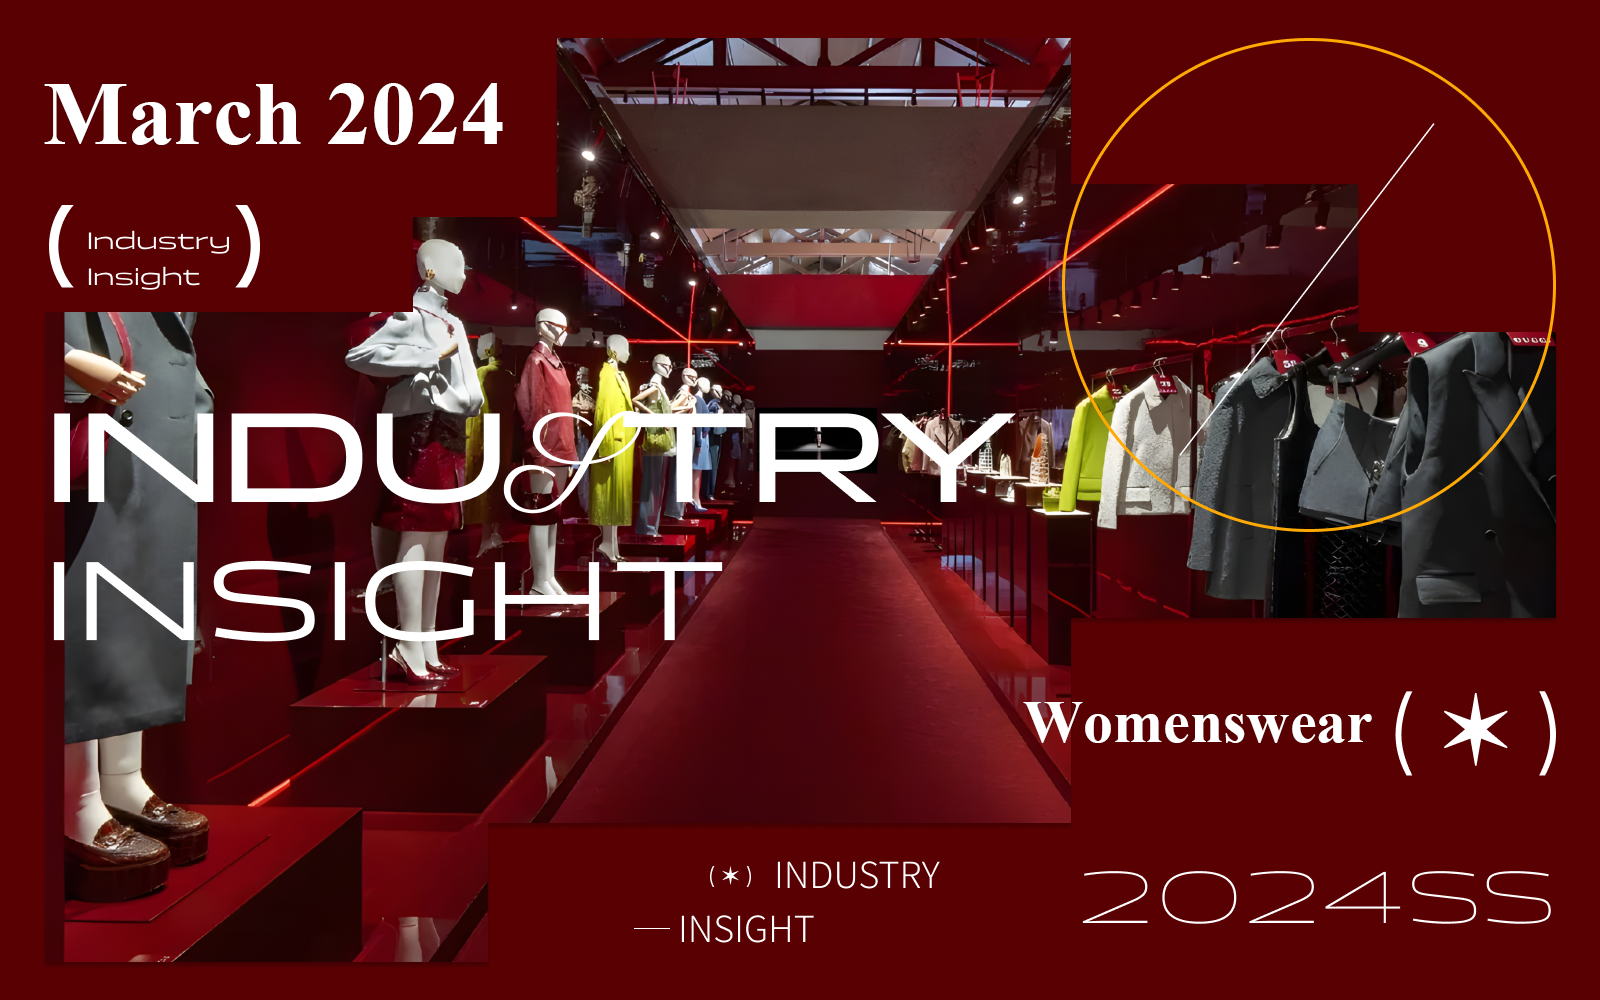 March 2024 -- The Industry Insight of Womenswear